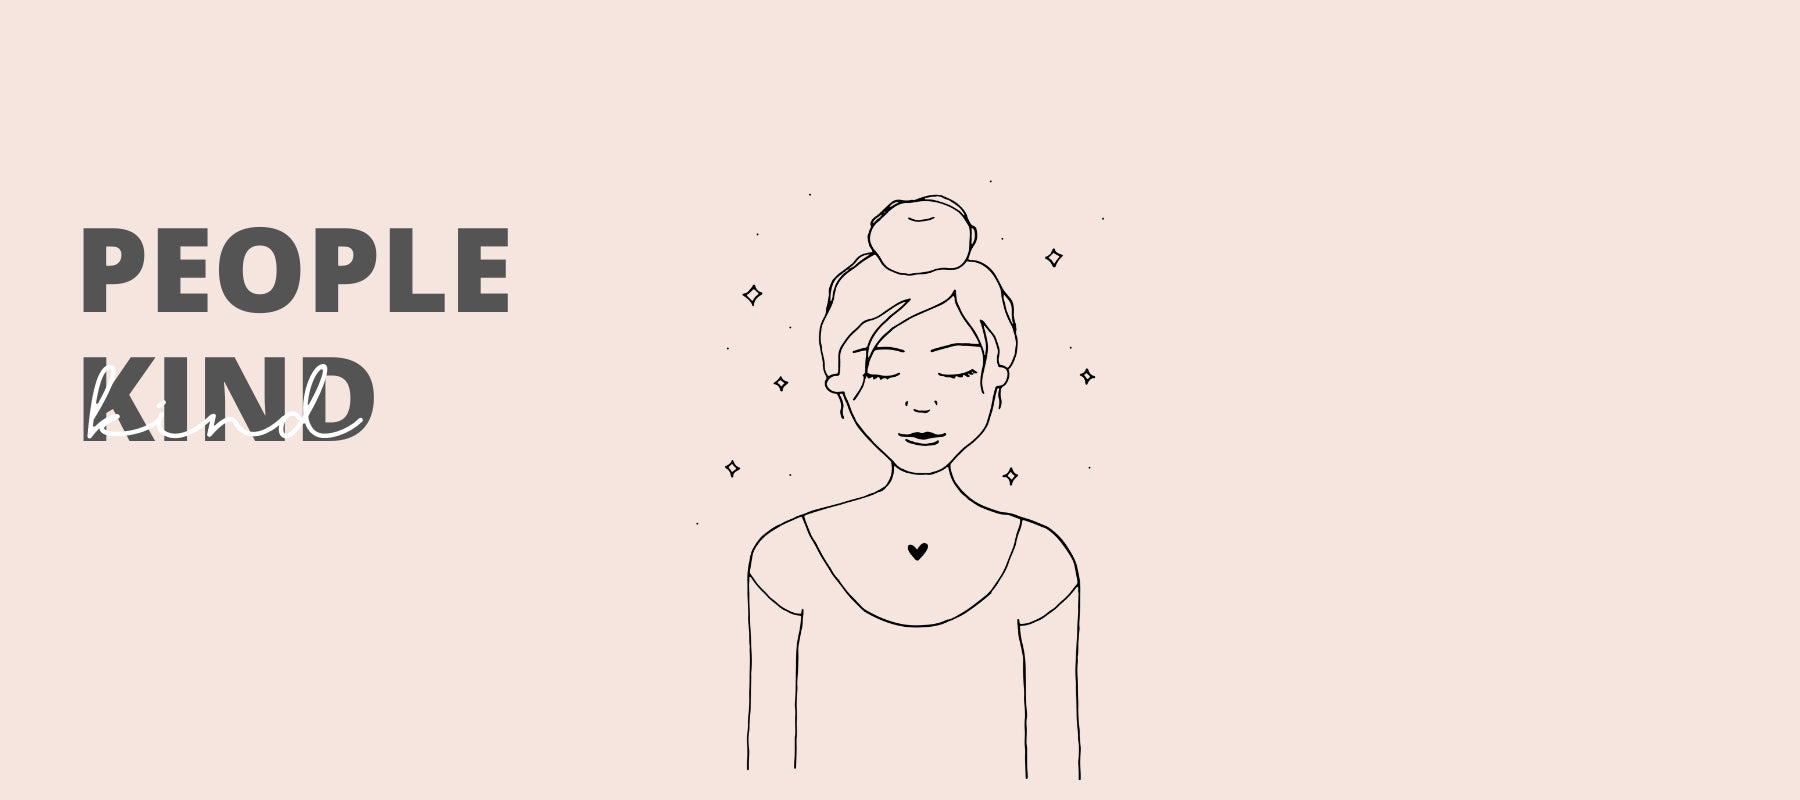 Beautiful doodle image of a woman who feels happy and content because she know that her bodycare is doing good, not harm to people.